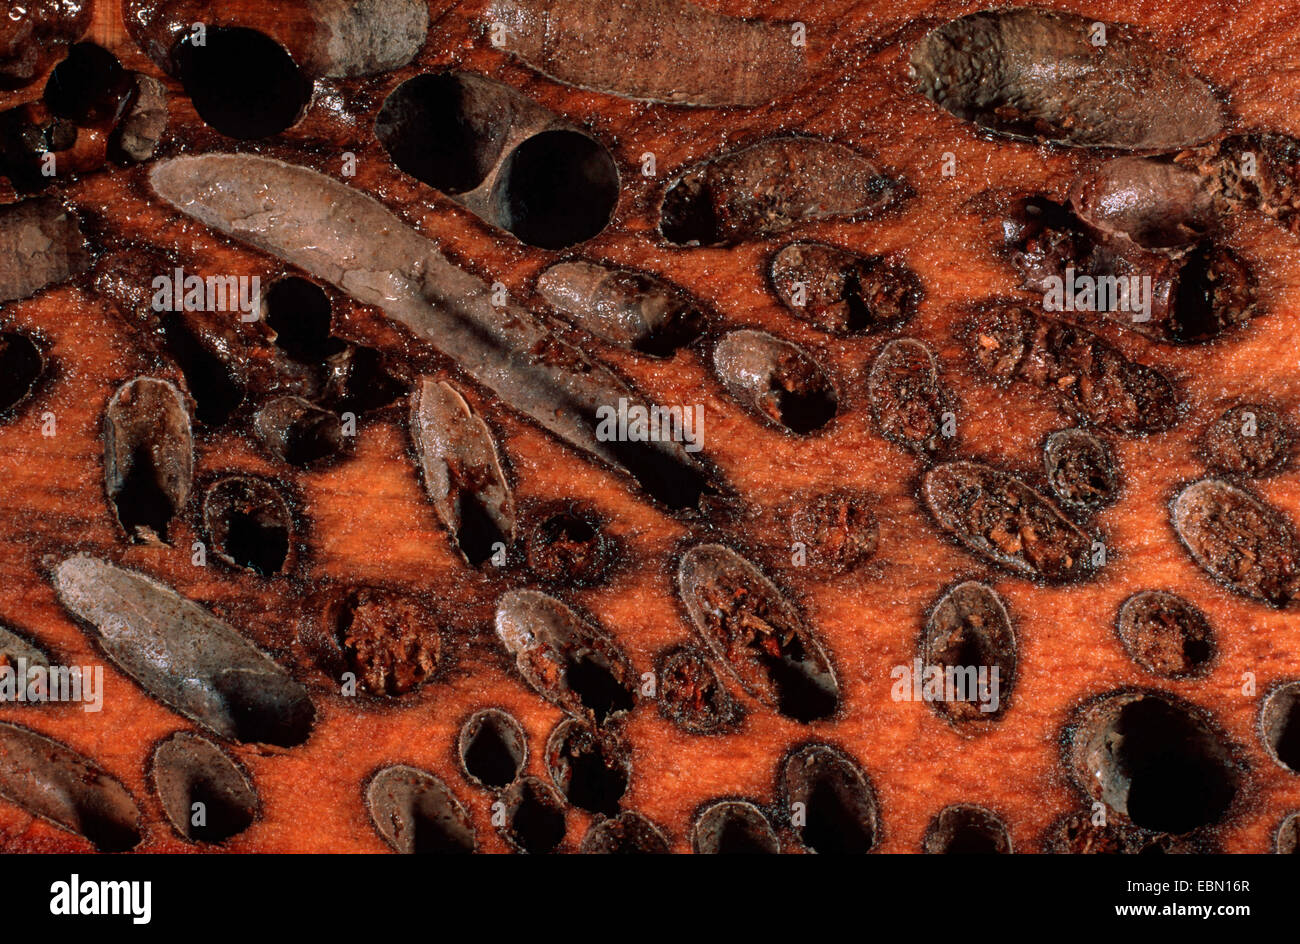 naval shipworm, common shipworm, great shipworm (Teredo navalis), wood cluttered with drill holes Stock Photo